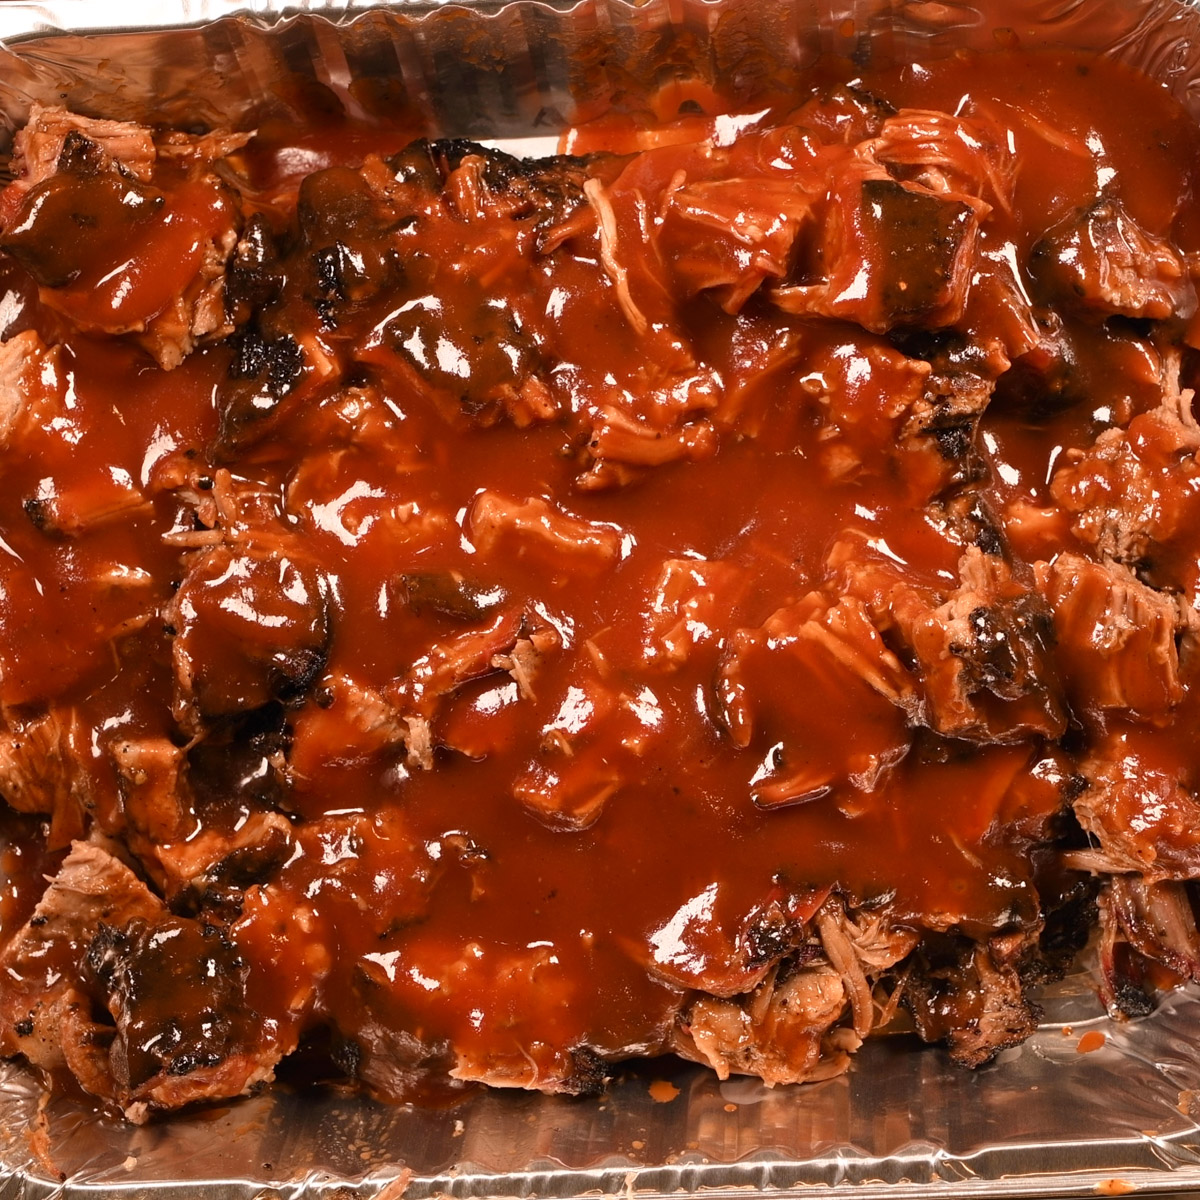 Burnt ends with BBQ sauce.